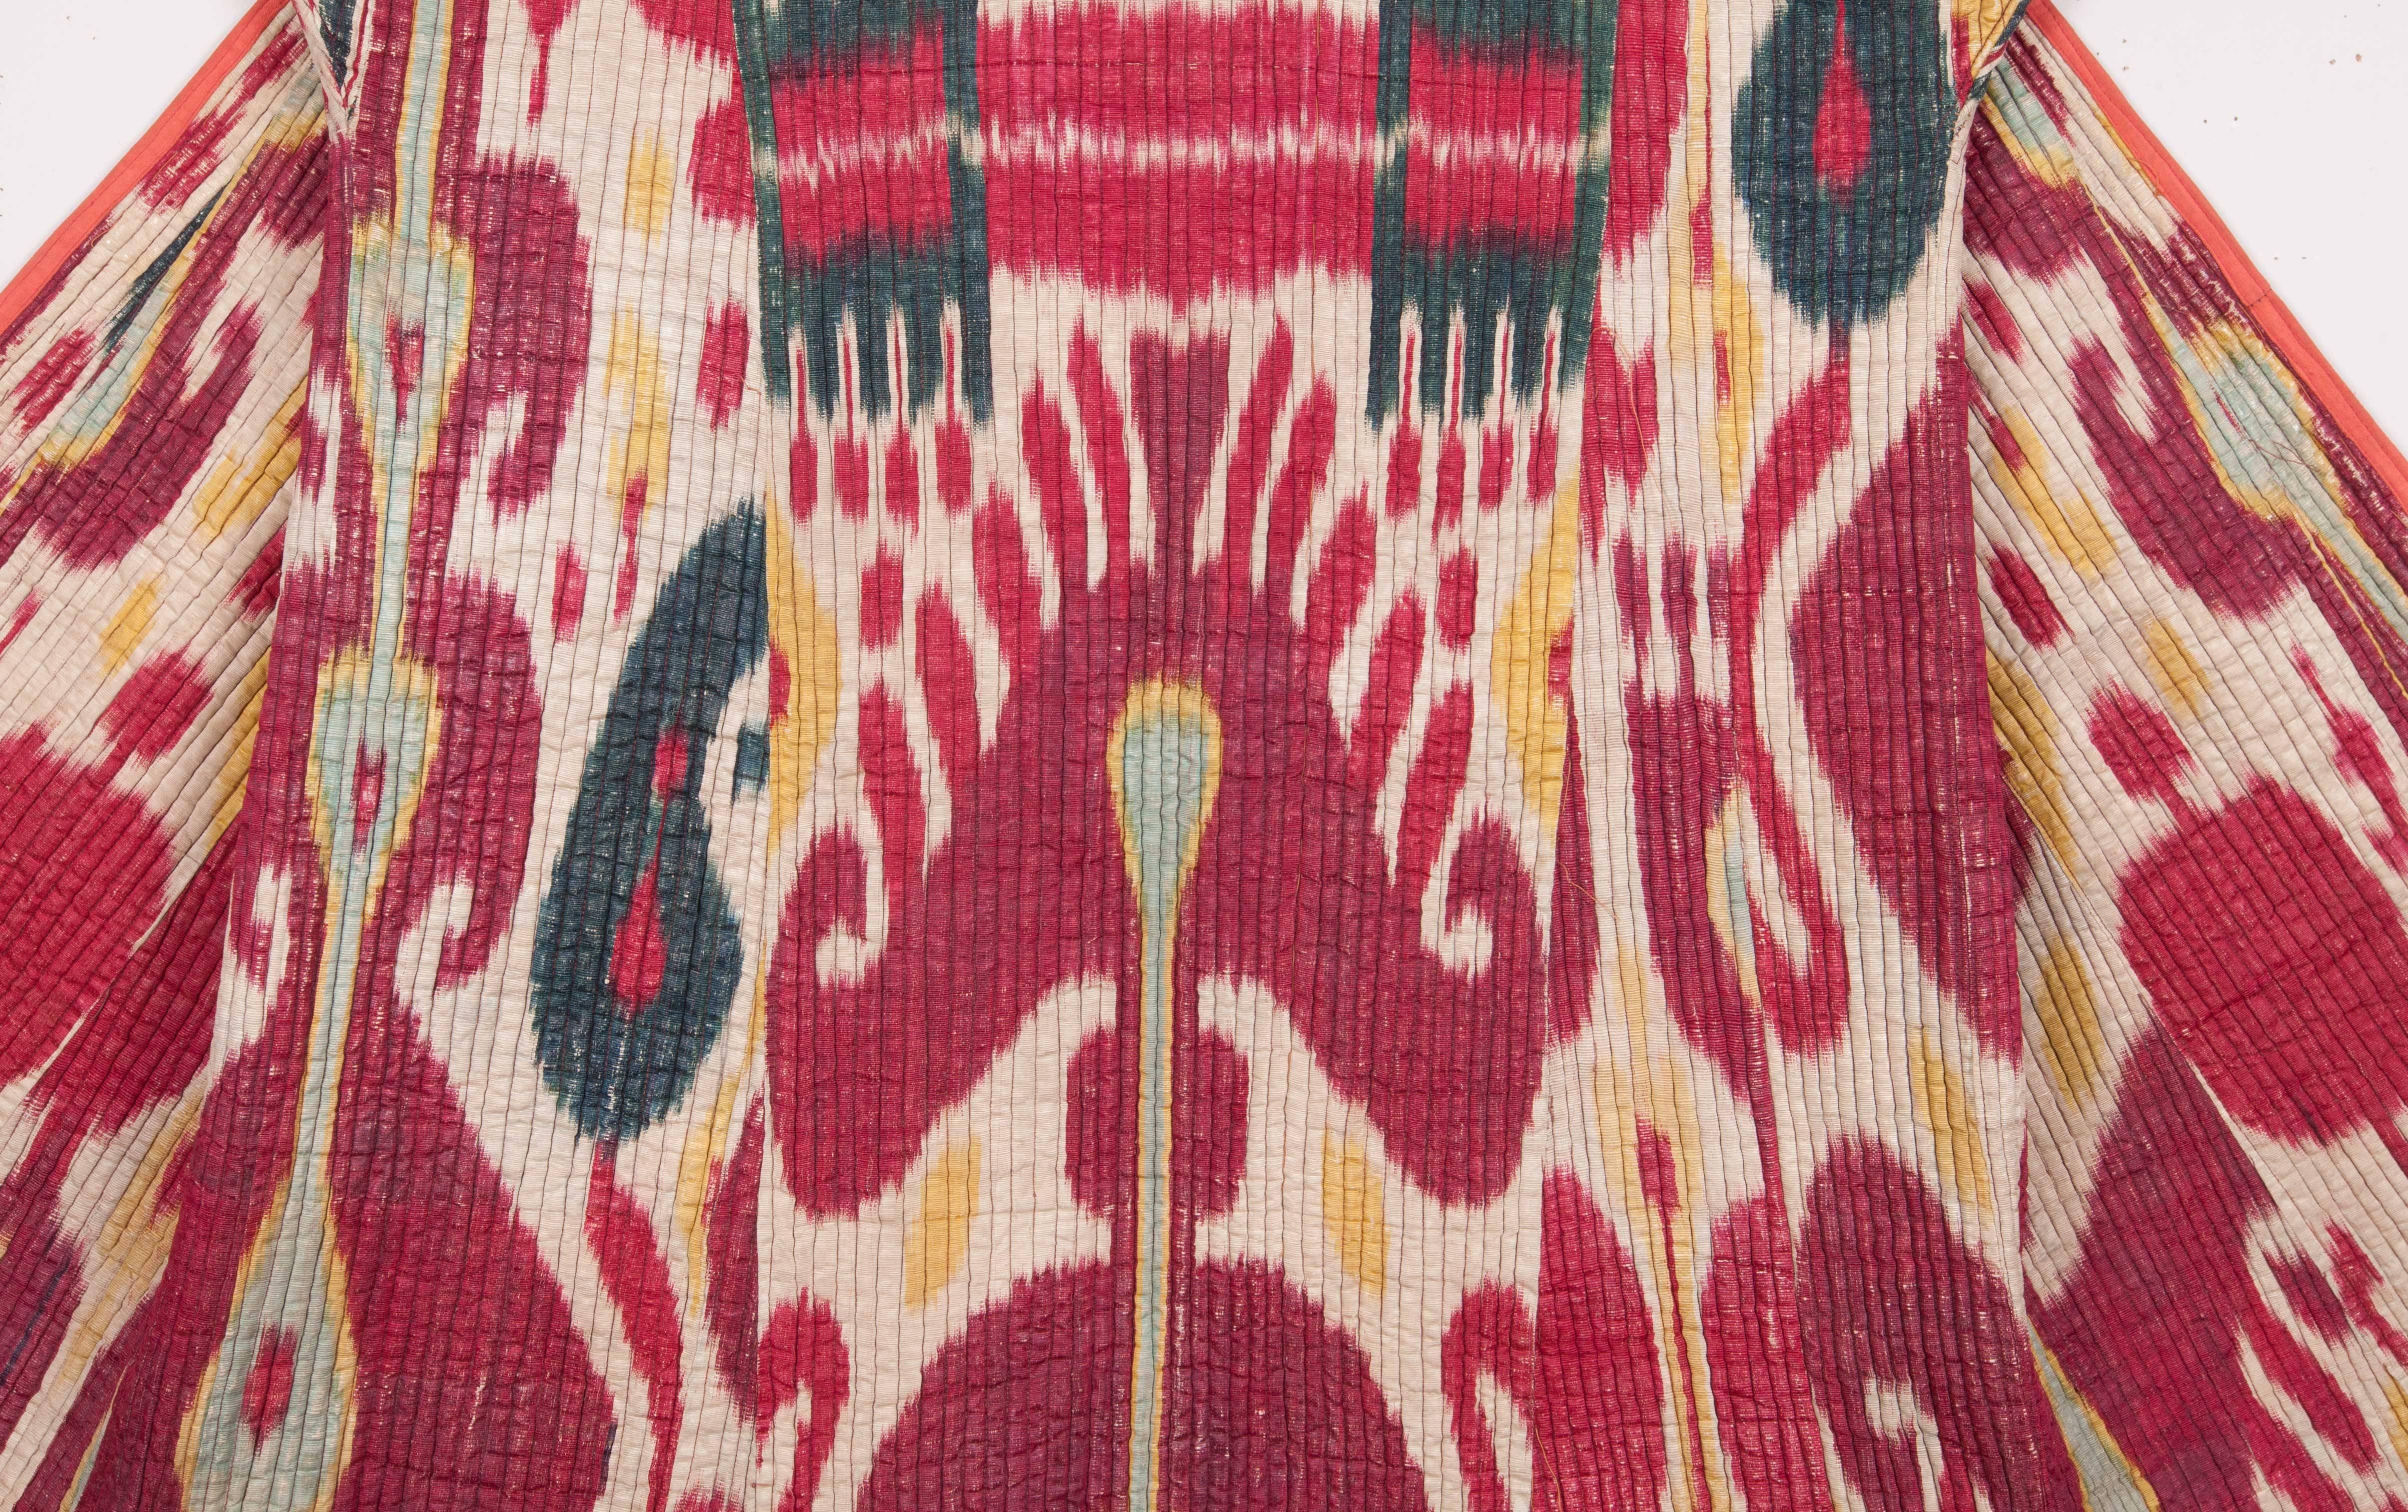 Islamic Antique Central Asian Khorazm Quilted Ikat Chapan